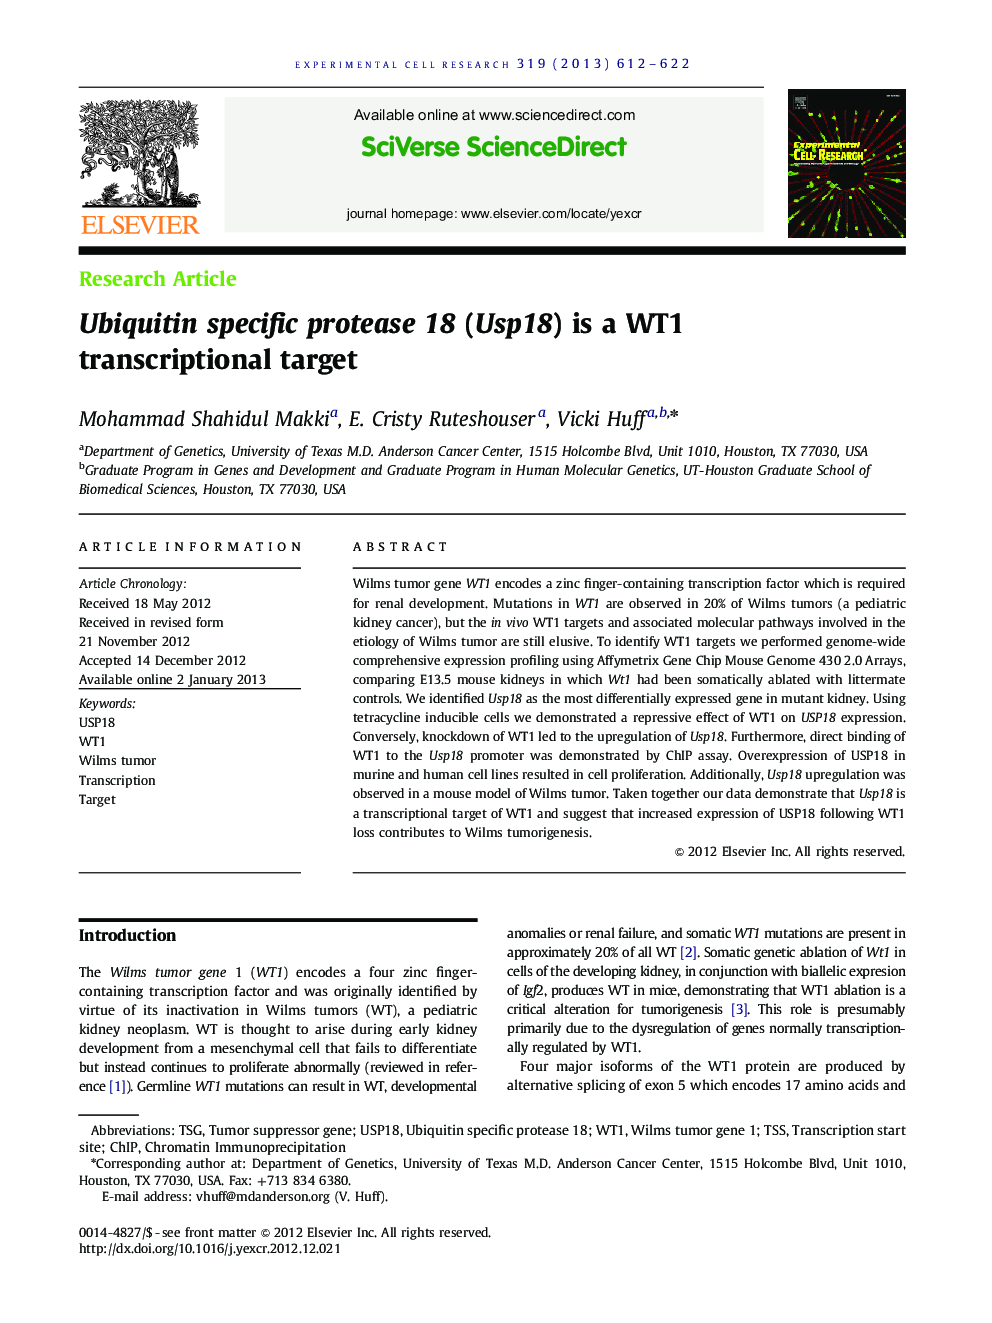 Ubiquitin specific protease 18 (Usp18) is a WT1 transcriptional target